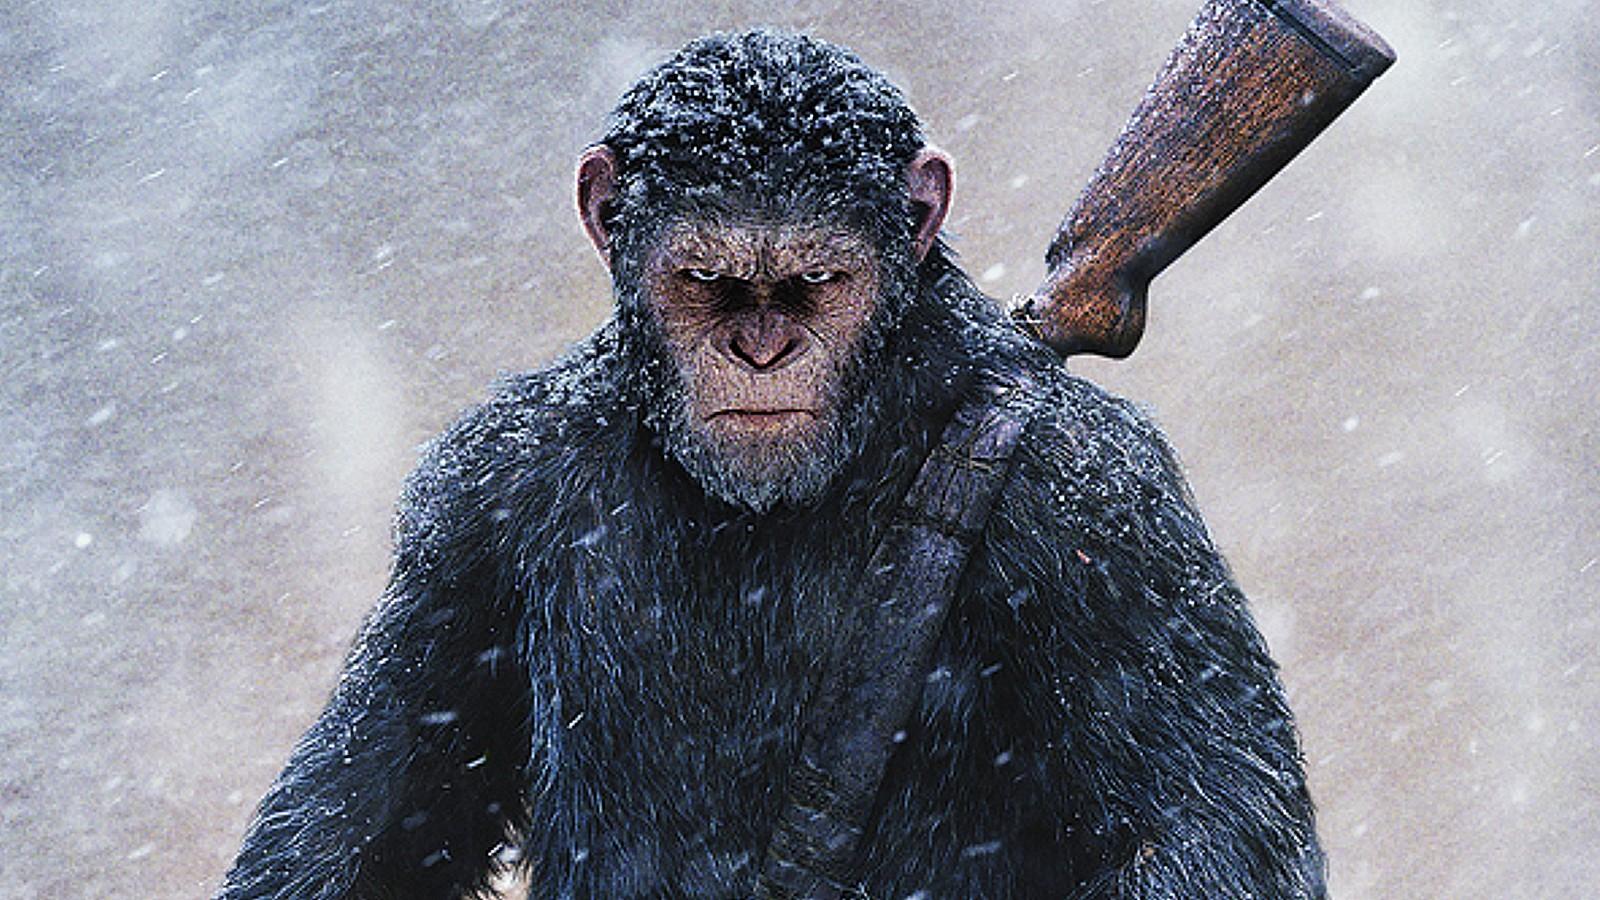 Caesar in War for the Planet of the Apes